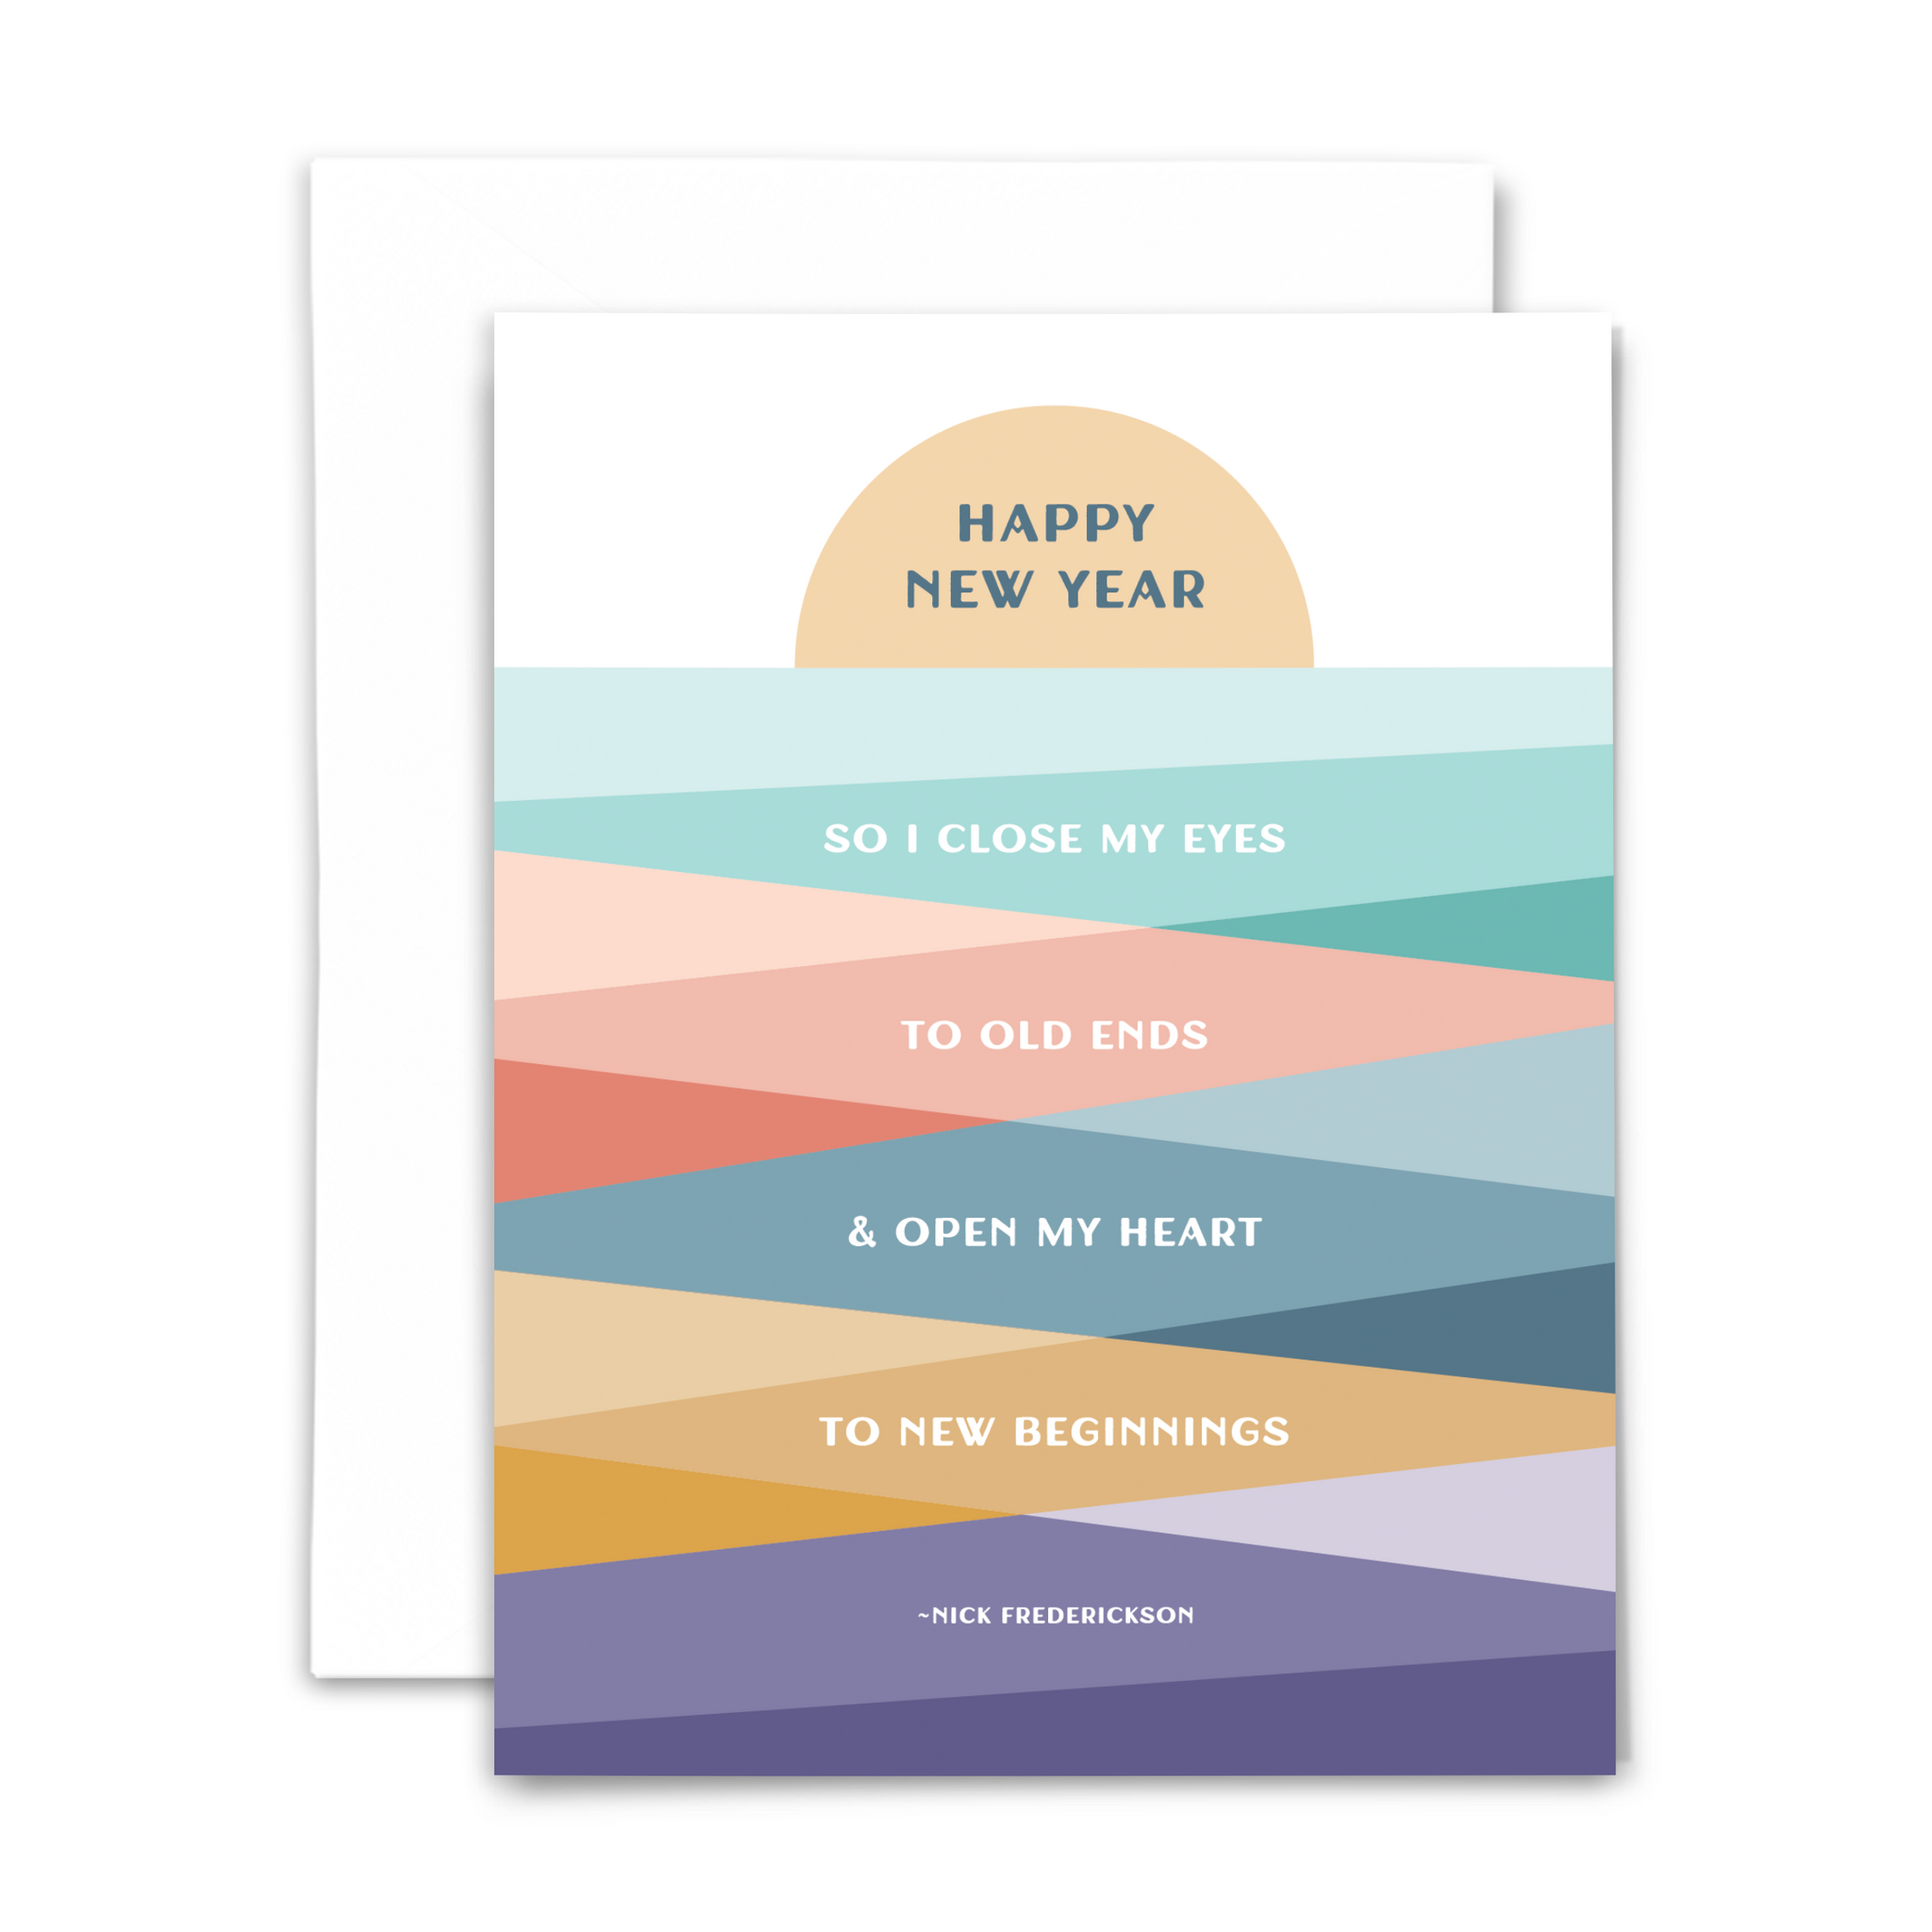 New years greeting card; "So I close my eyes to old ends & open my heart to new beginnings ~ Nick Frederickson" in white font atop overlapping triangles in shades of teal, pink, blue, gold and purple; rising sun reaches upward from triangles with "happy new year" in center; with white envelope